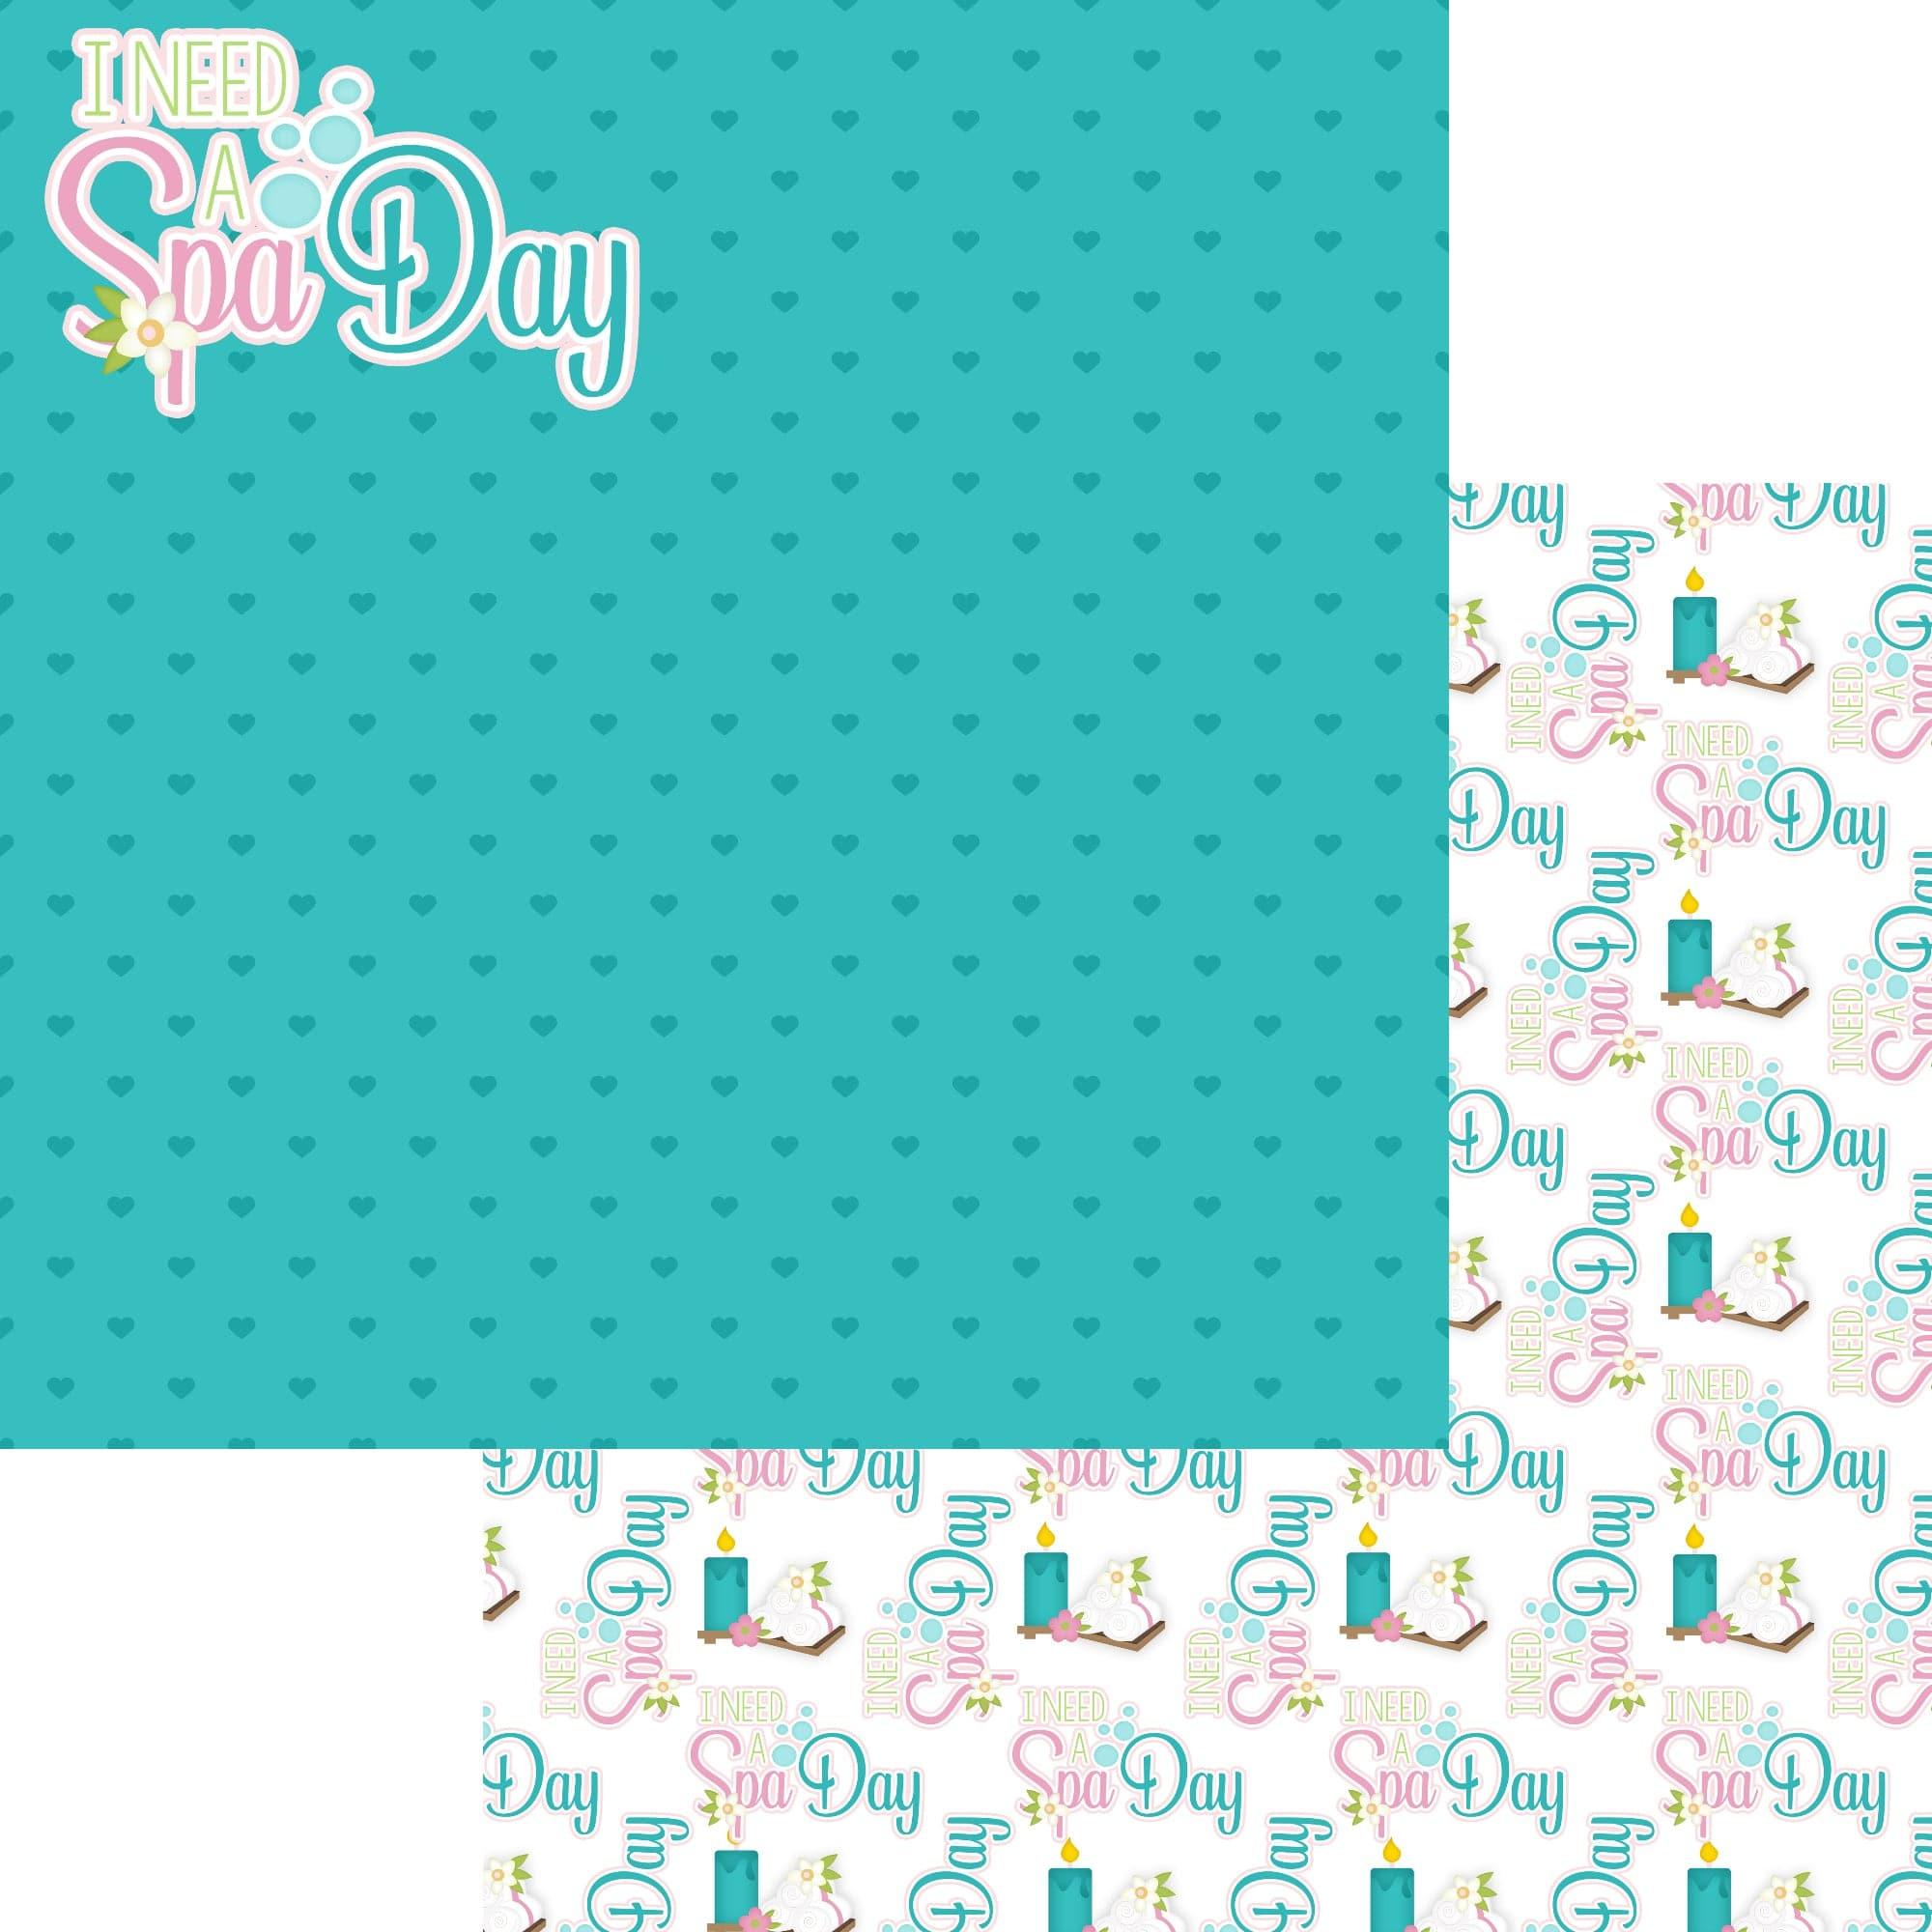 Just Fun Collection Spa Day 12 x 12 Double-Sided Scrapbook Paper by SSC Designs